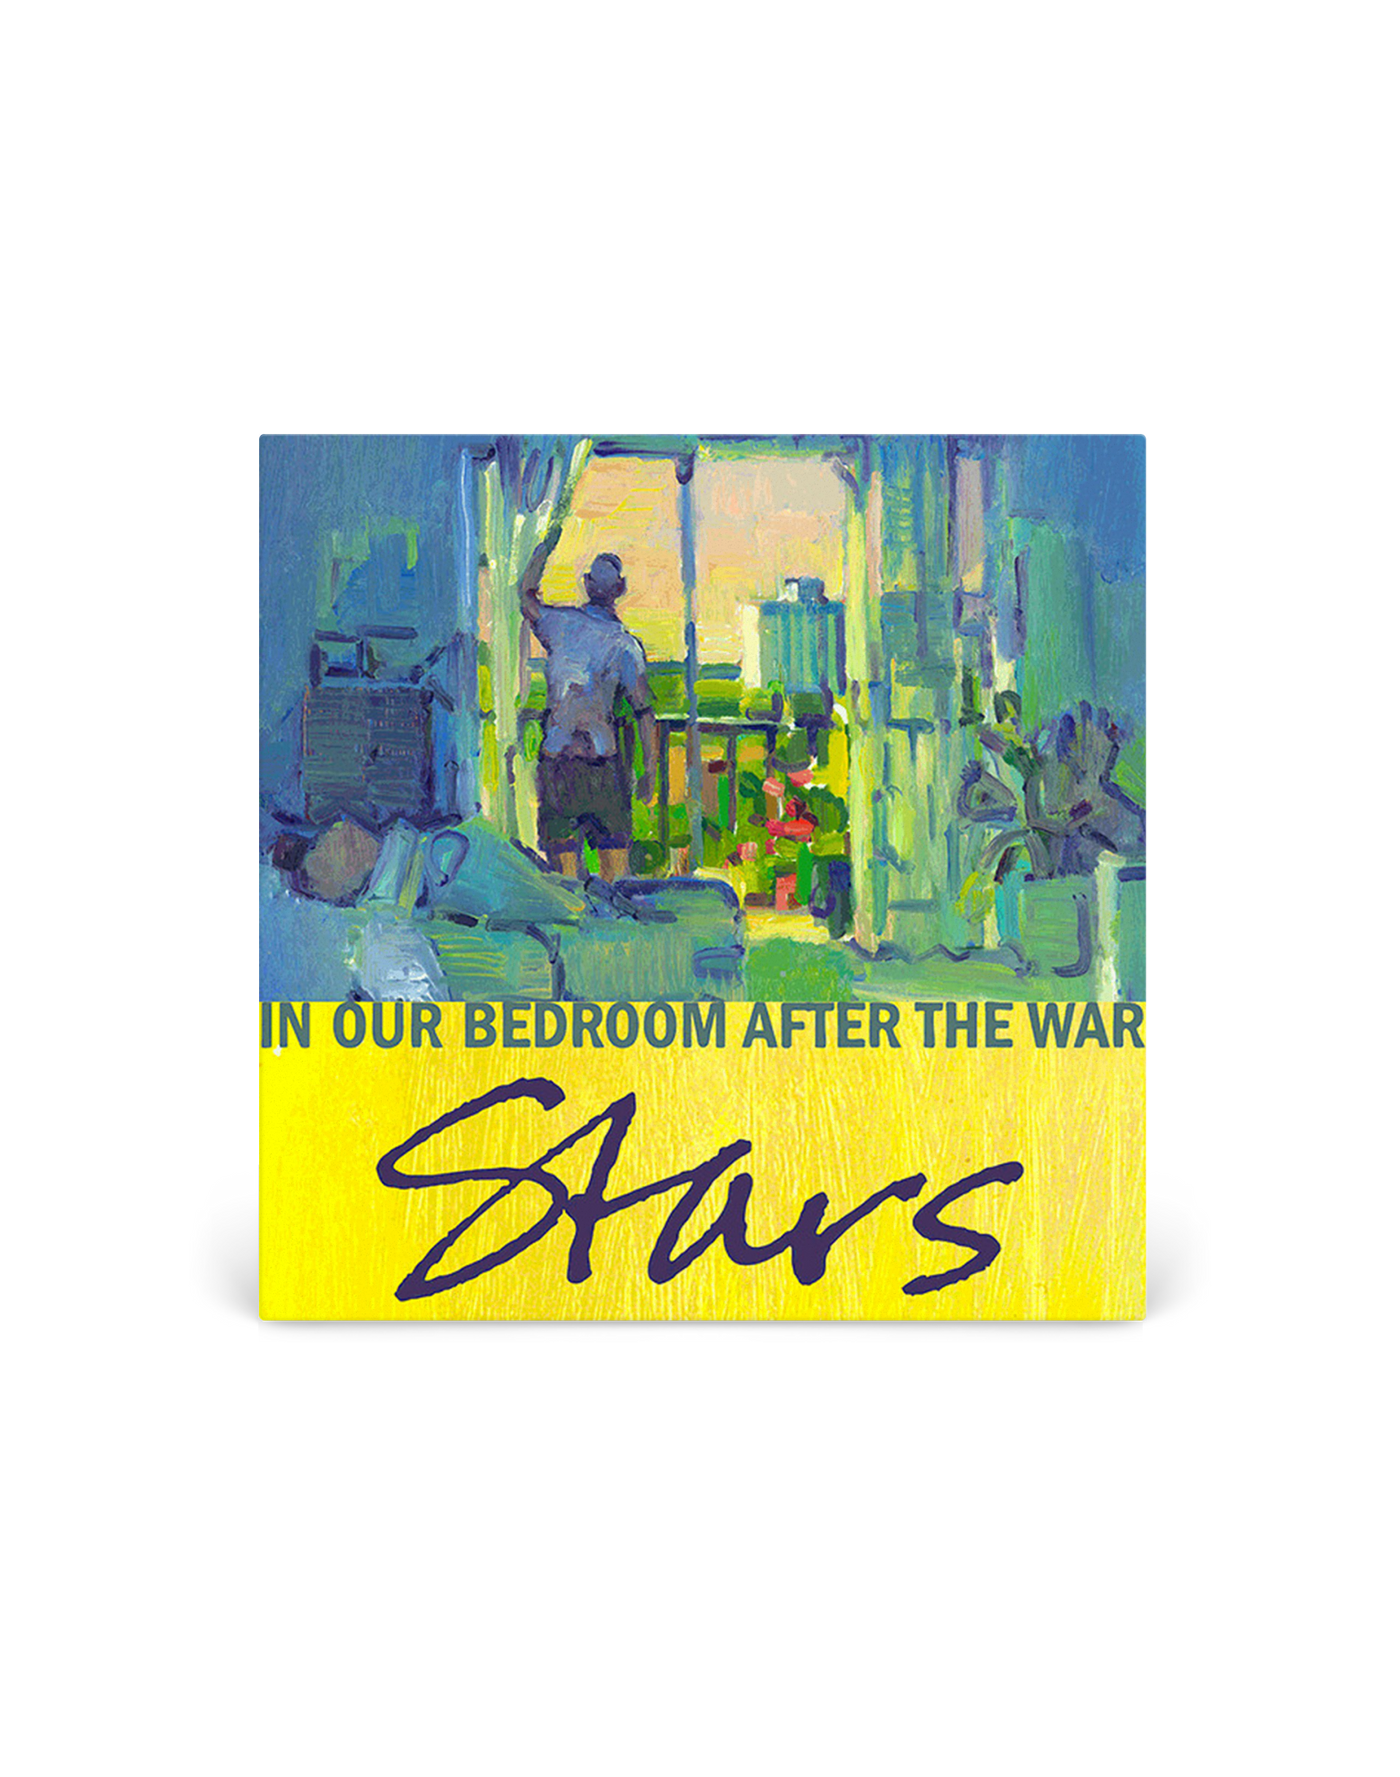 CD - Stars In Our Bedroom After the War